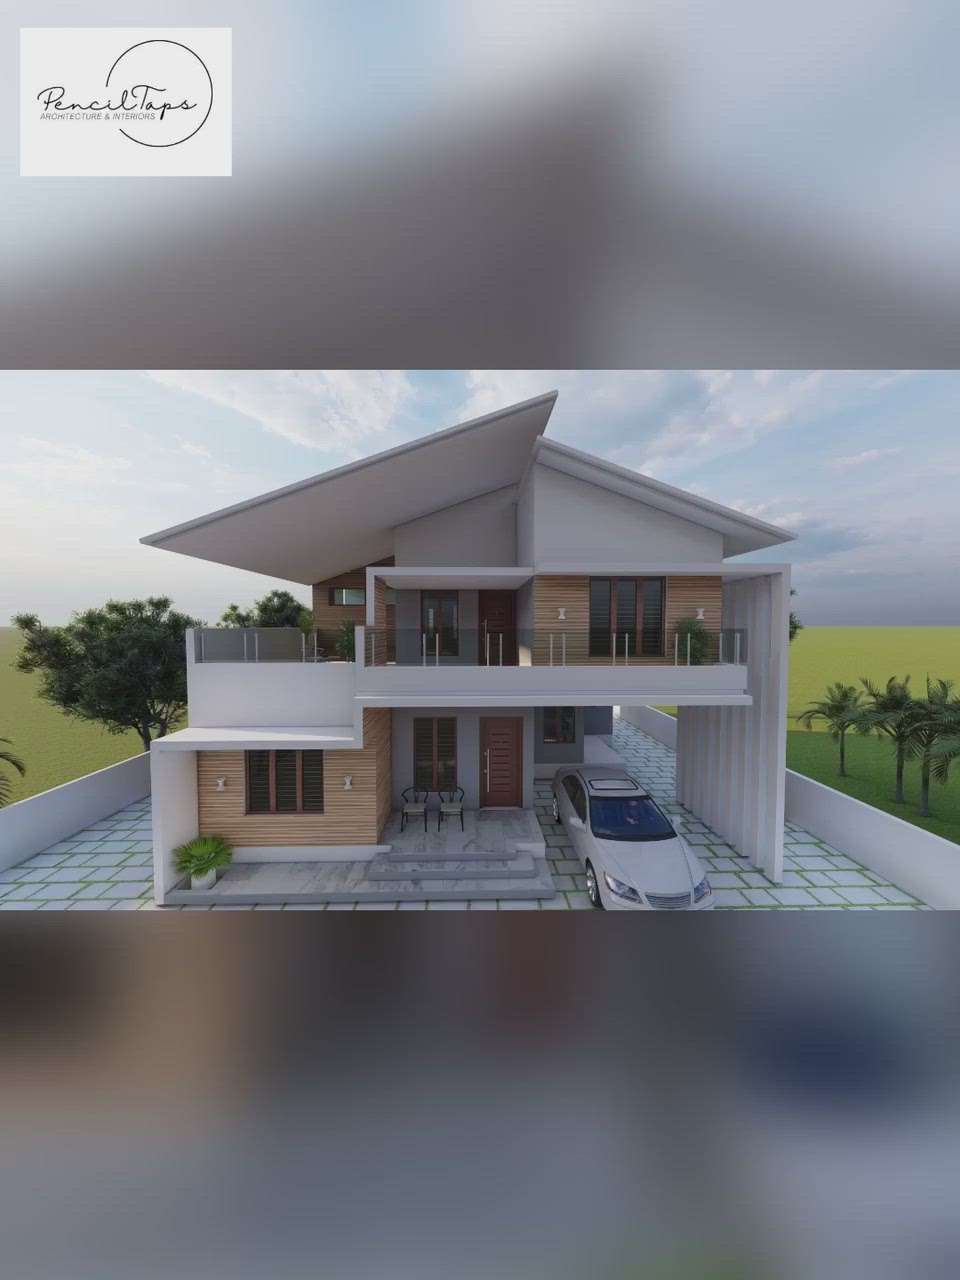 Final part 
Elevation detailing 
Site Chennamangalam
Area 2500 sqft
Budget 45 -50lakh
Architecture & interior - Penciltaps by suhana
Contractor- Basheer yusuf 

My services:- 
Architectural services 
Plan & 3d elevation 
Interior drawings &3ds 
Permit drawings 
Interior 
Elevation 
Plan 

#plan
#freeplan
#Elevation #homedesigne #Architectural&Interior #kerala_architecture #architecturedaily #keralaarchitectureproject #new_home #elevationideas #elevationdesigning #homedesignkerala #homedesignideas #Architect #architecturevibes #detailed #3DPlans #3delevation🏠